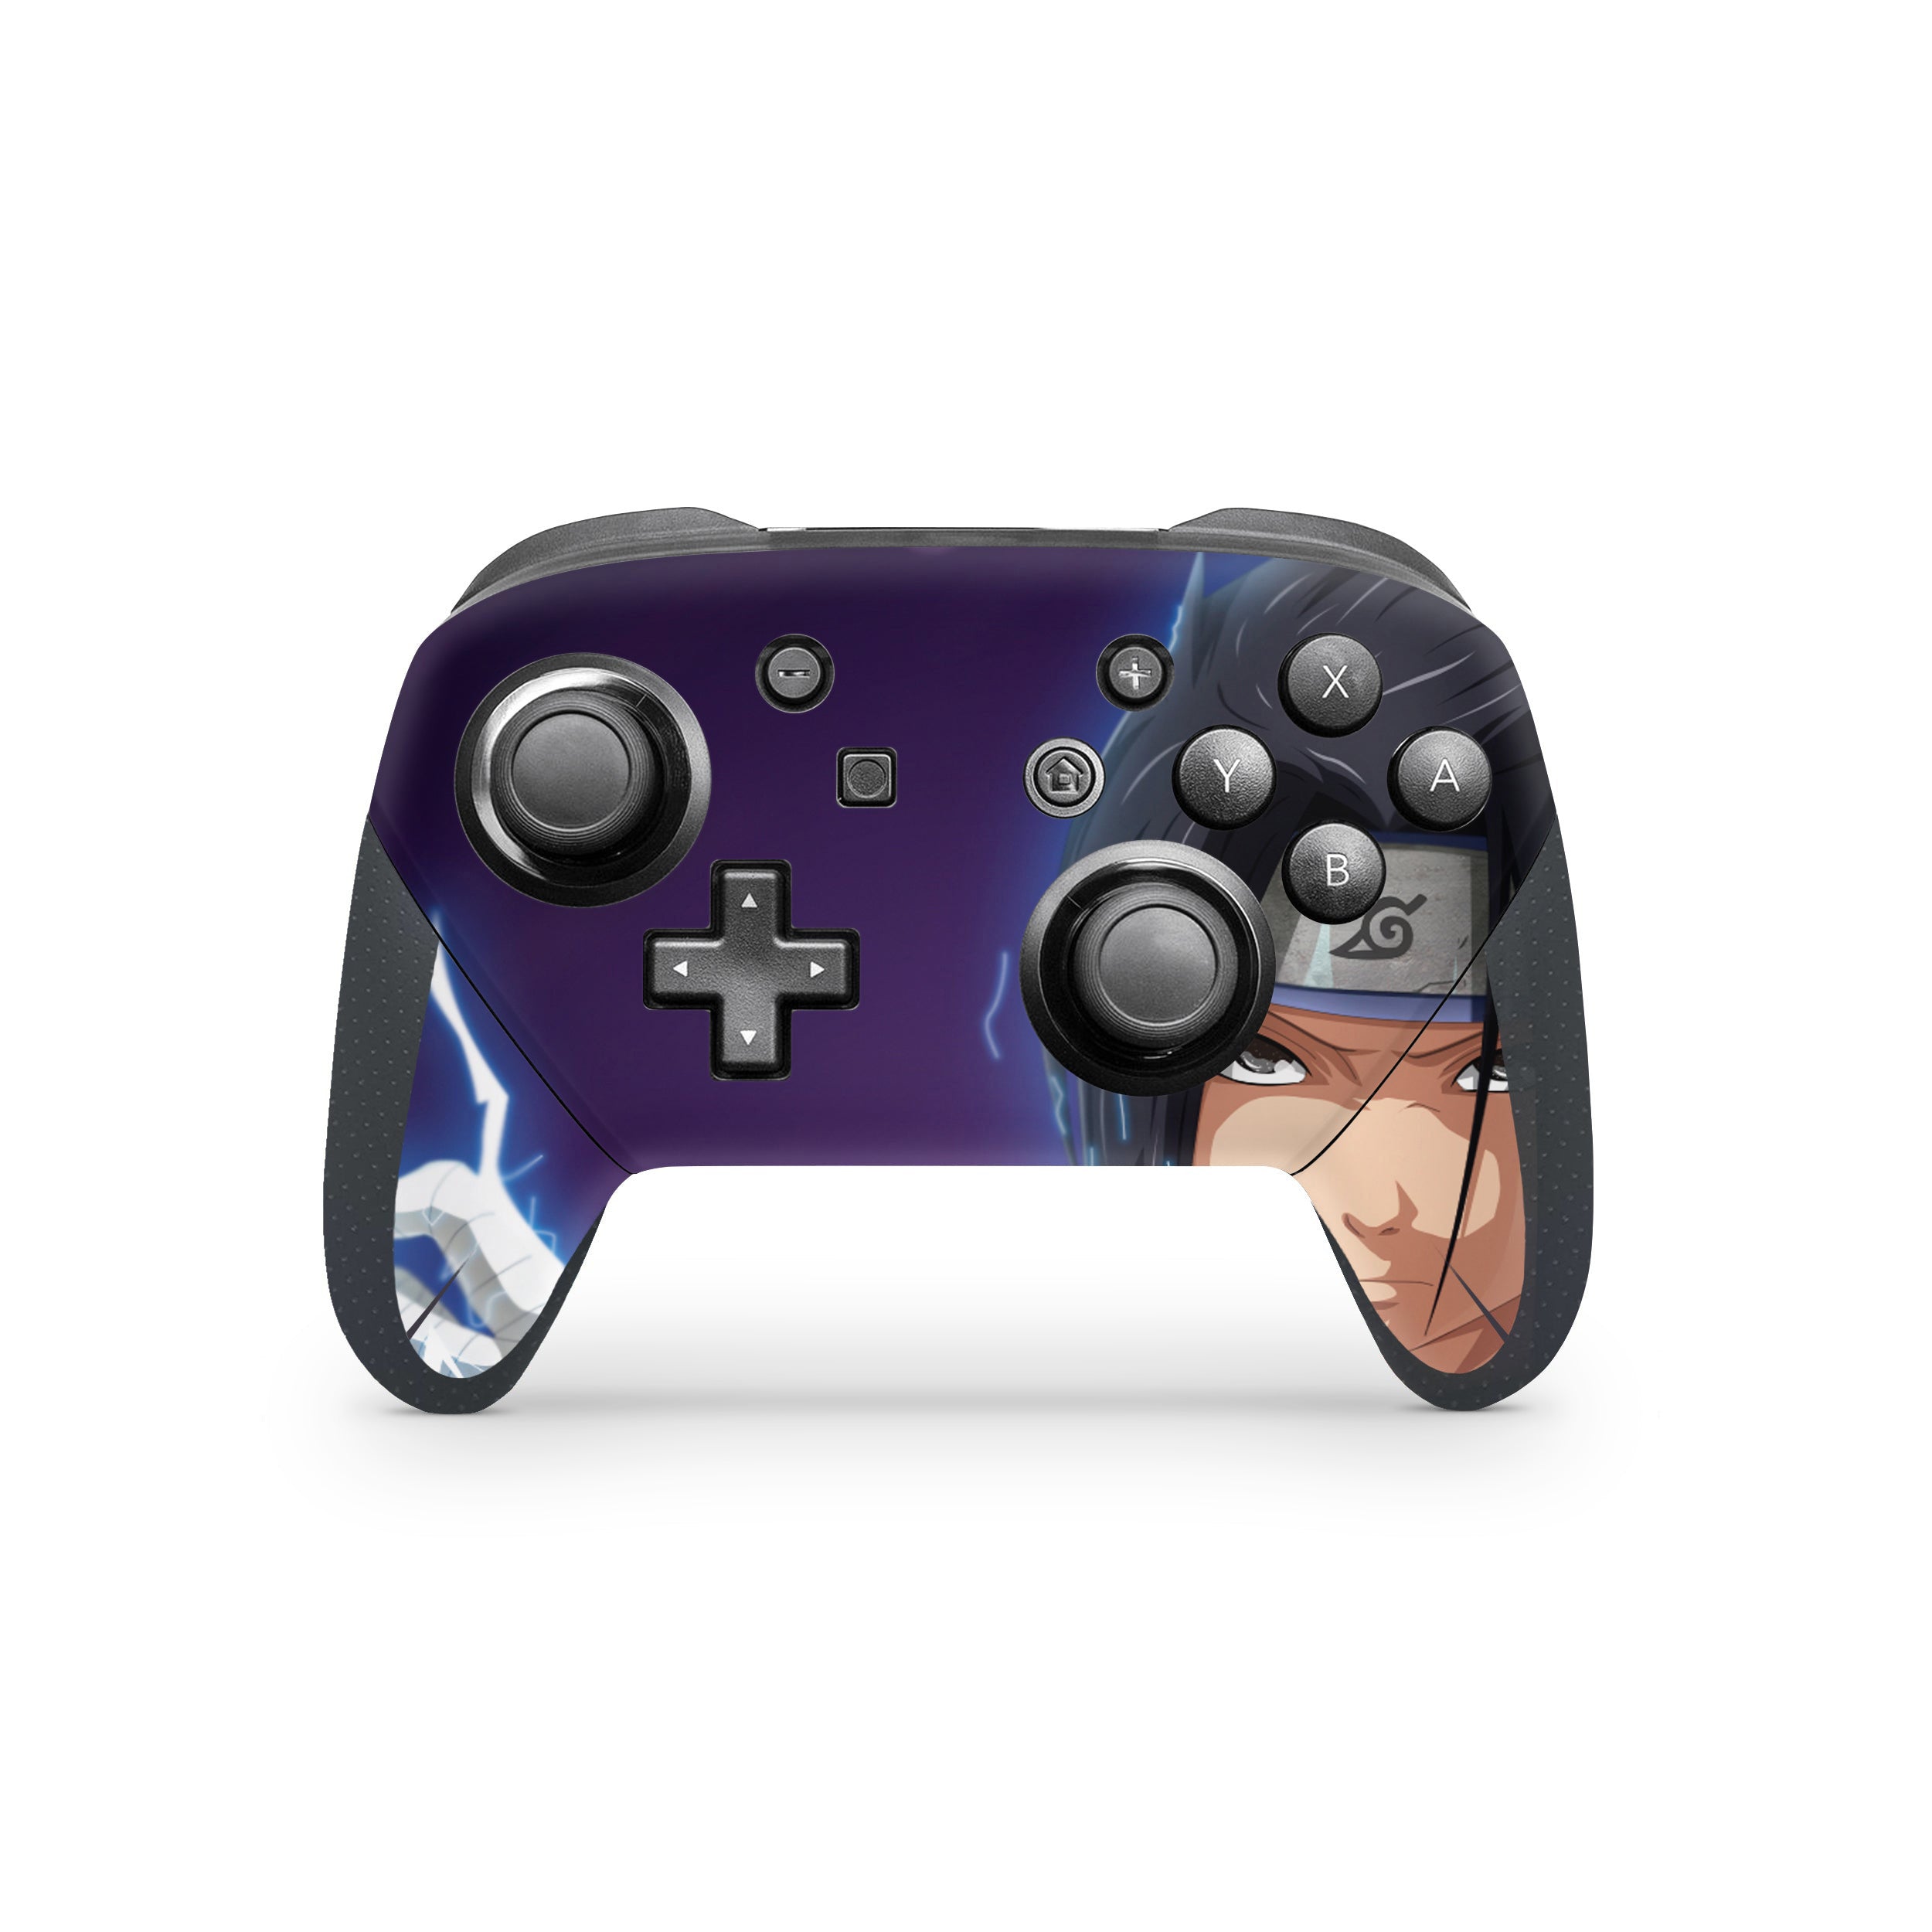 A video game skin featuring a Naruto Sasuke design for the Switch Pro Controller.